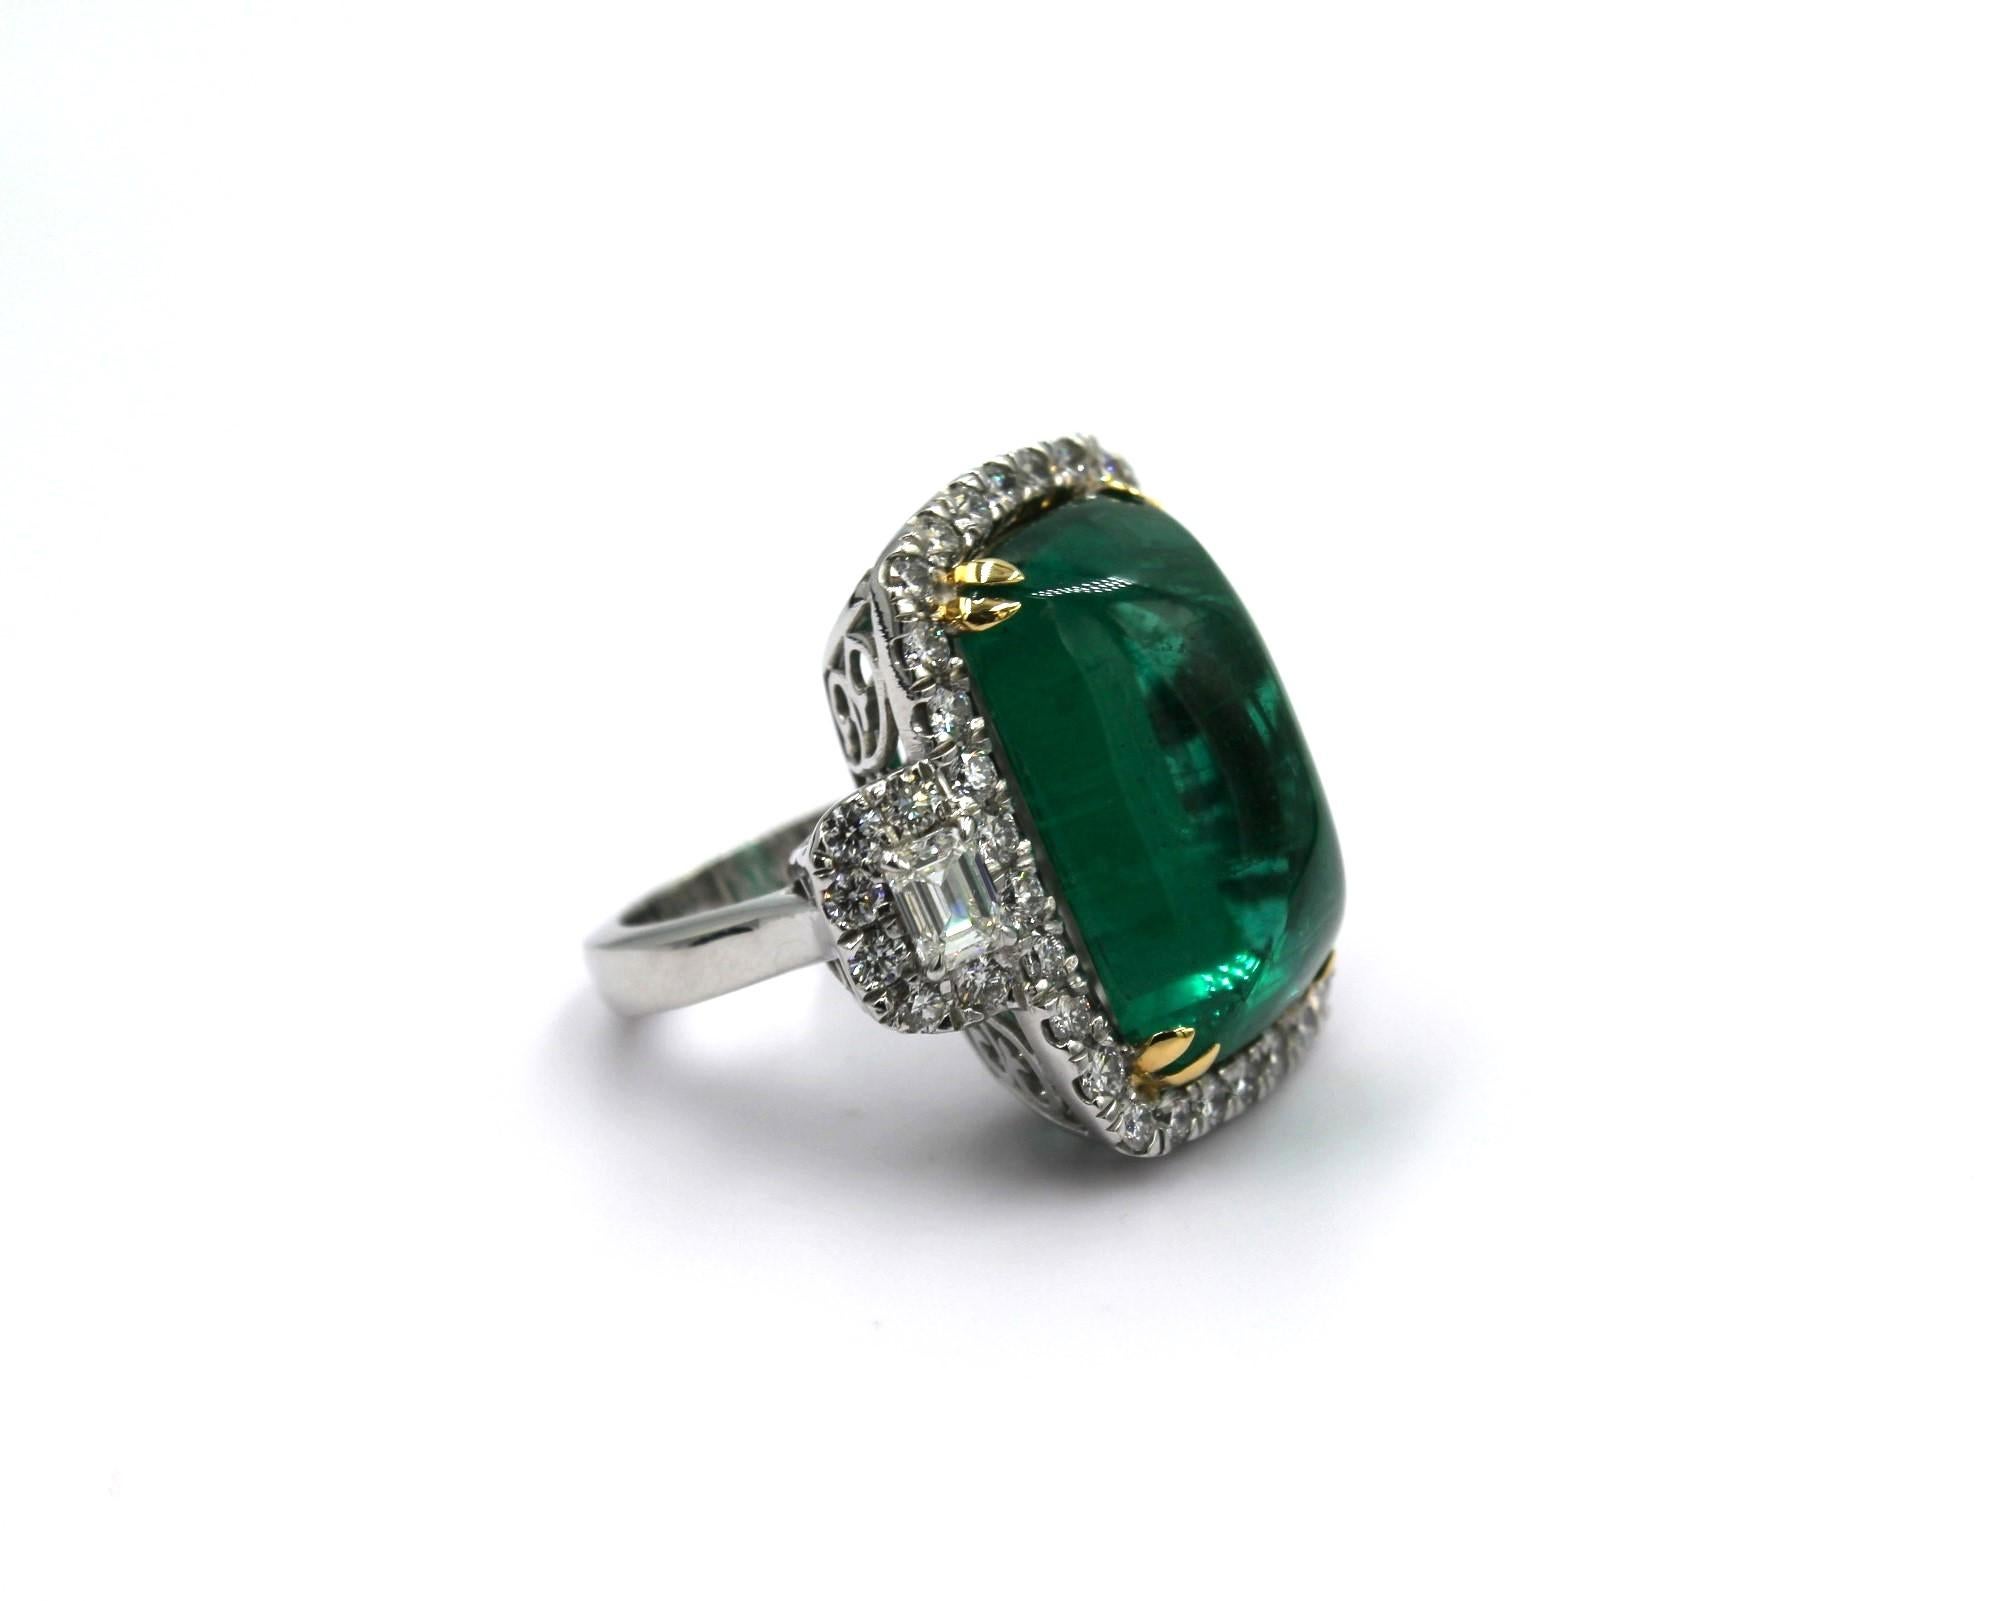 24.32 carats Cabochon Sugarloaf Zambian Emerald with two side emerald cut Diamonds of 0.435 carats on the side and framed with 42 round diamonds totaling a diamond weight of 1.91 carats. 

This piece will highlight your elegance and uniqueness.